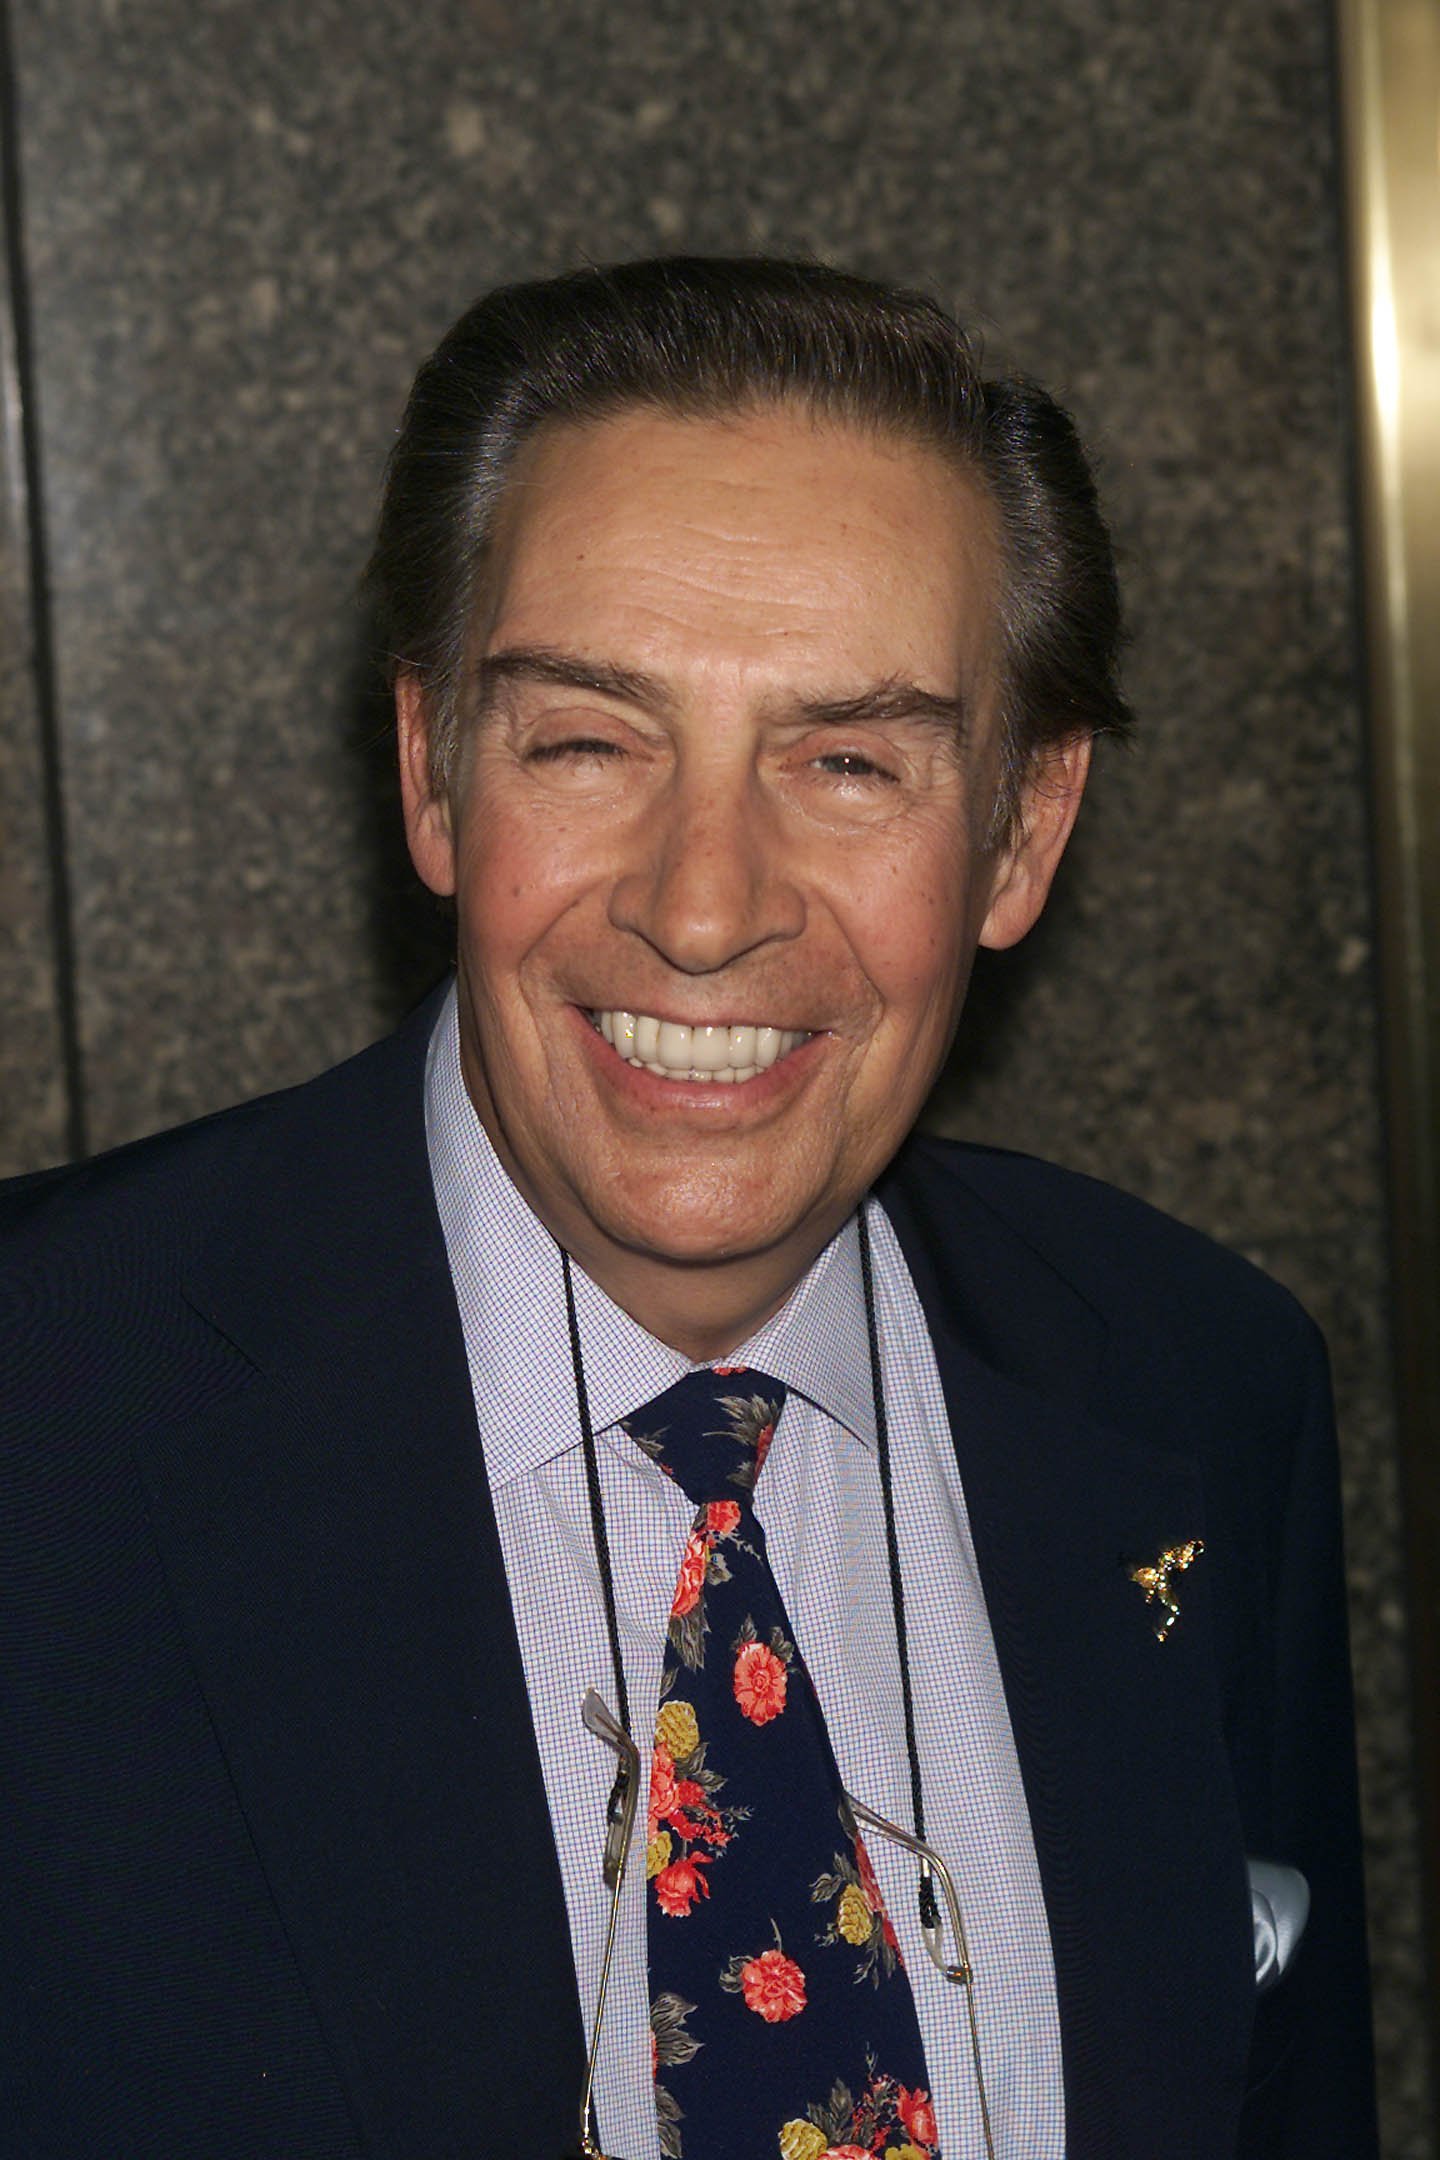 Jerry Orbach arrives at the NBC upfront at Radio City Music Hall in New York City, May 14, 2001. | Source: Getty Images.